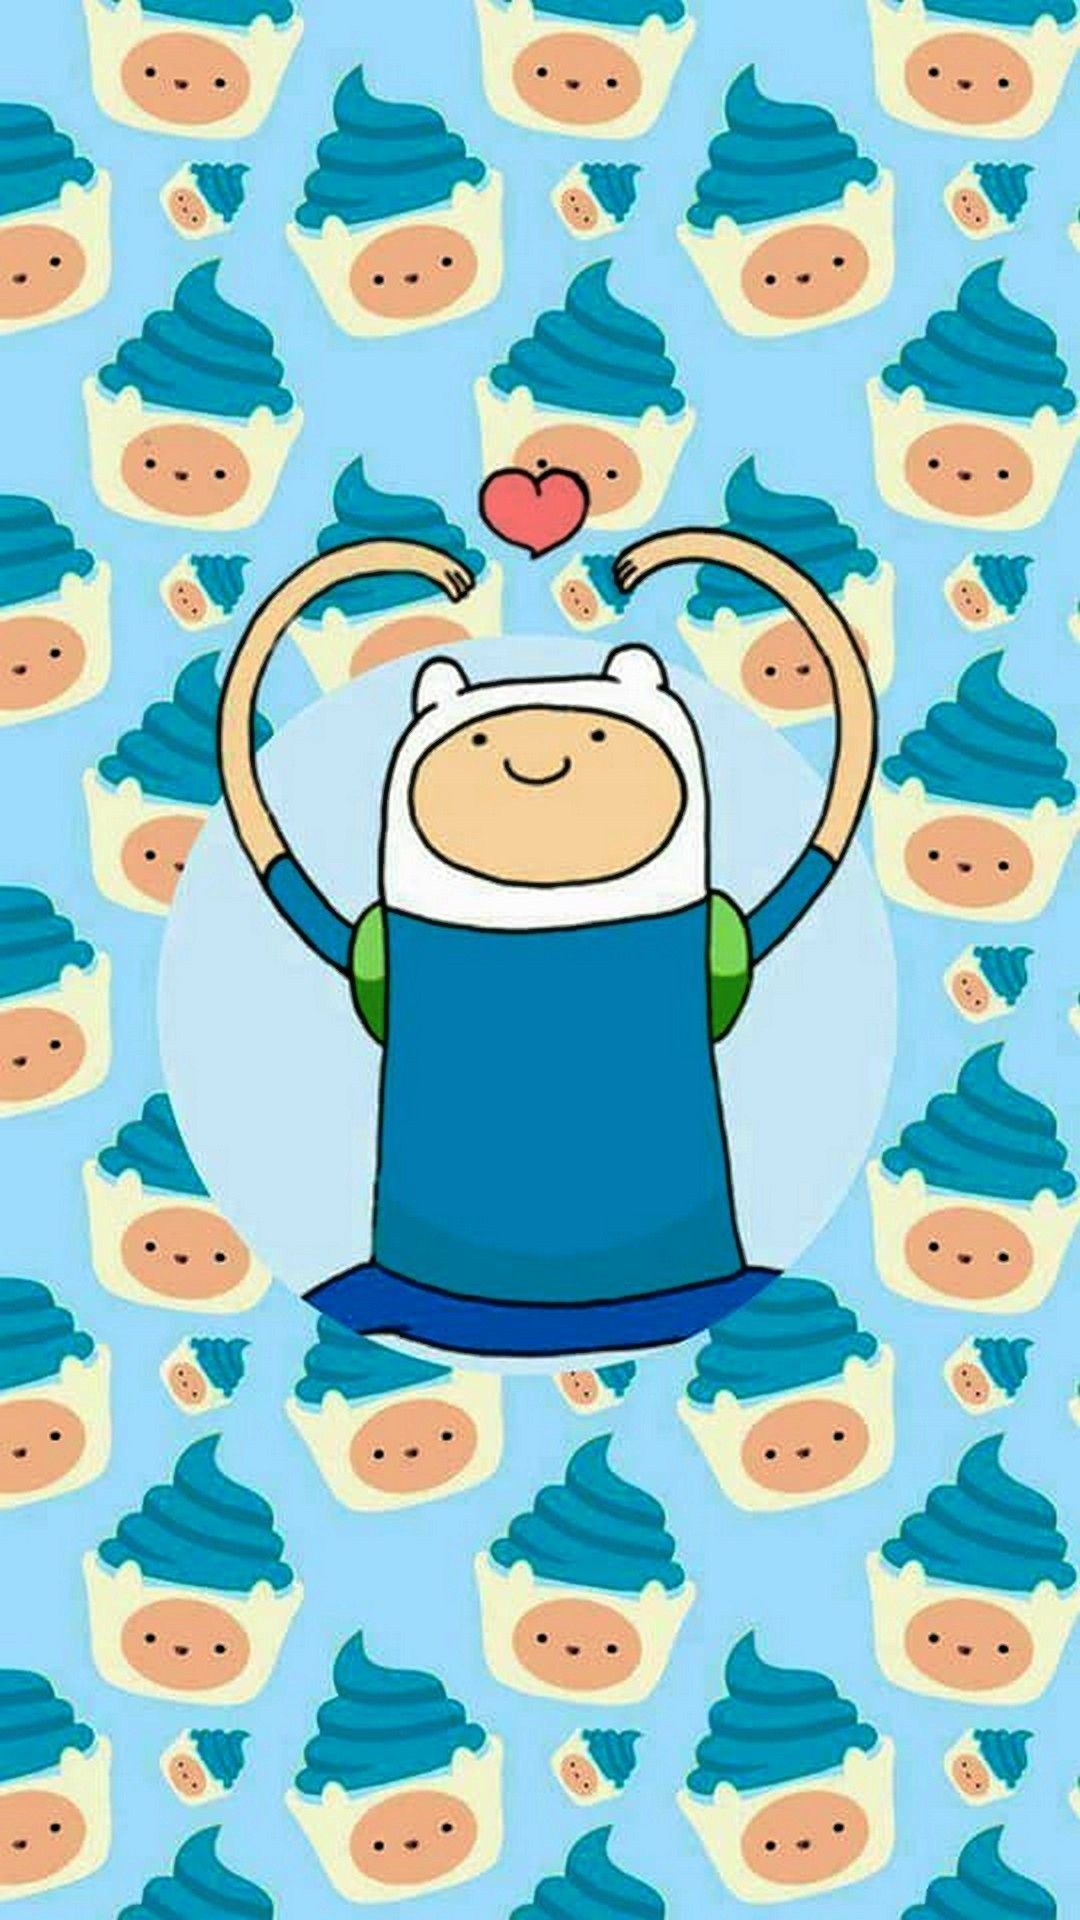 Adventure Time Finn iPhone Wallpaper with high-resolution 1080x1920 pixel. You can use this wallpaper for your iPhone 5, 6, 7, 8, X, XS, XR backgrounds, Mobile Screensaver, or iPad Lock Screen - Adventure Time